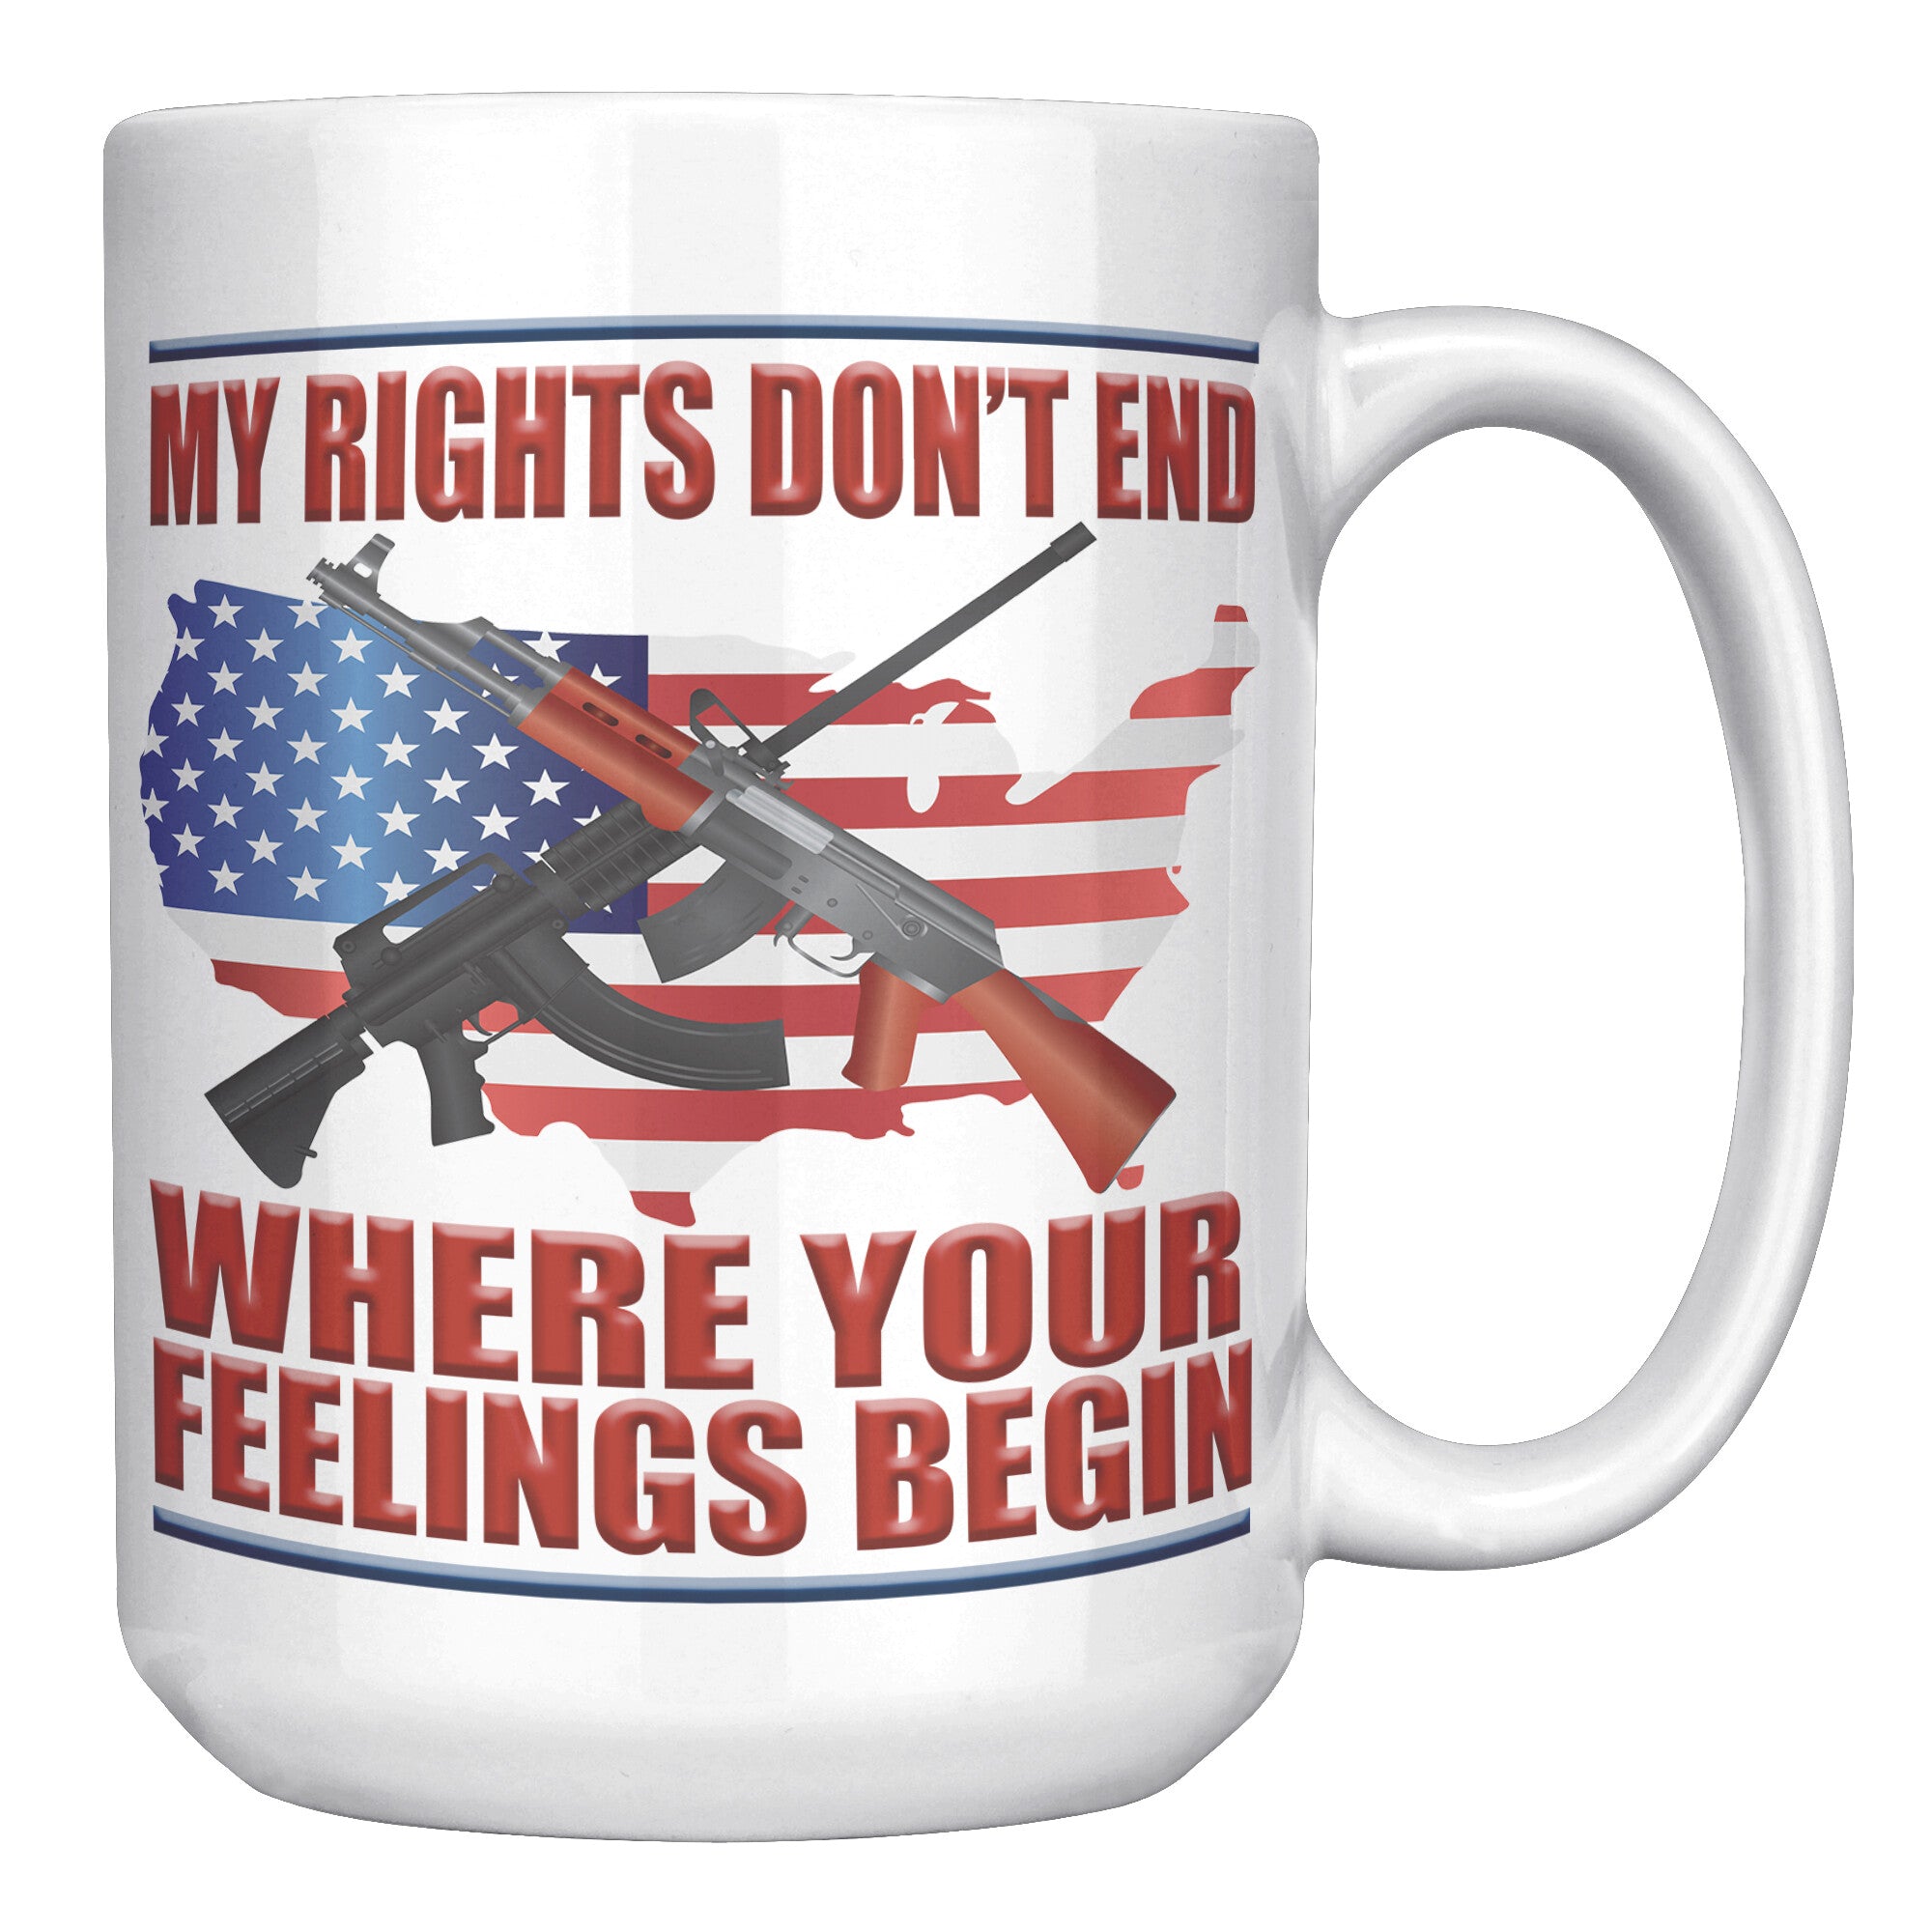 MY RIGHTS DON'T END WHERE YOUR FEELINGS BEGIN